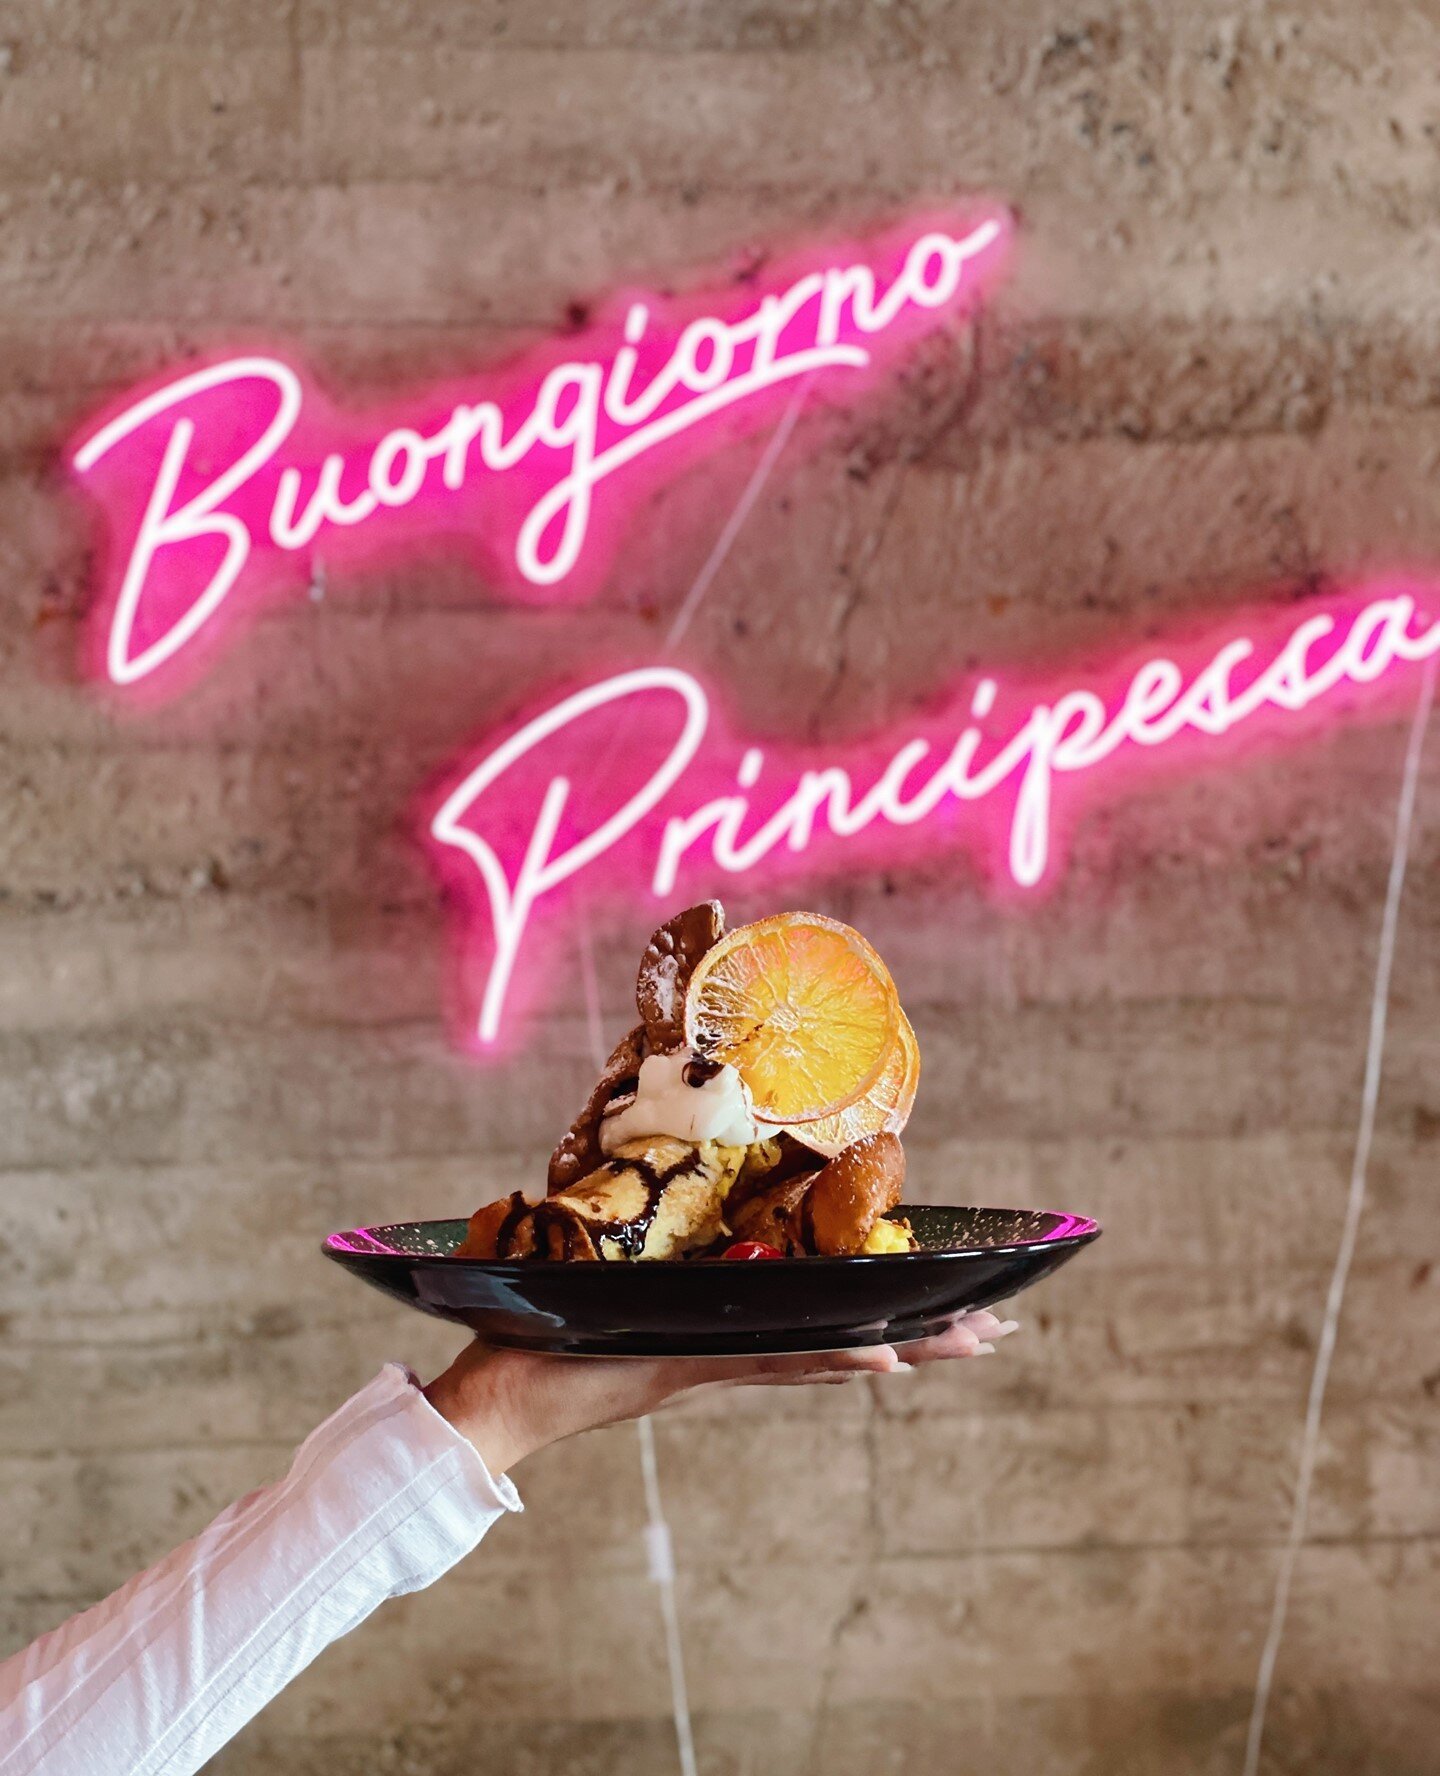 Buongiorno Principessa, we are officially open. 💖⁠
⁠
Come in and see us at your new favorite brunch spot every day from 8AM - 4PM. SEE YOU SOON!⁠
⁠
#BreakfastAndBubbles #TasteTheStars #BuongiornoPrincipessa #SanDiegoBrunch⁠